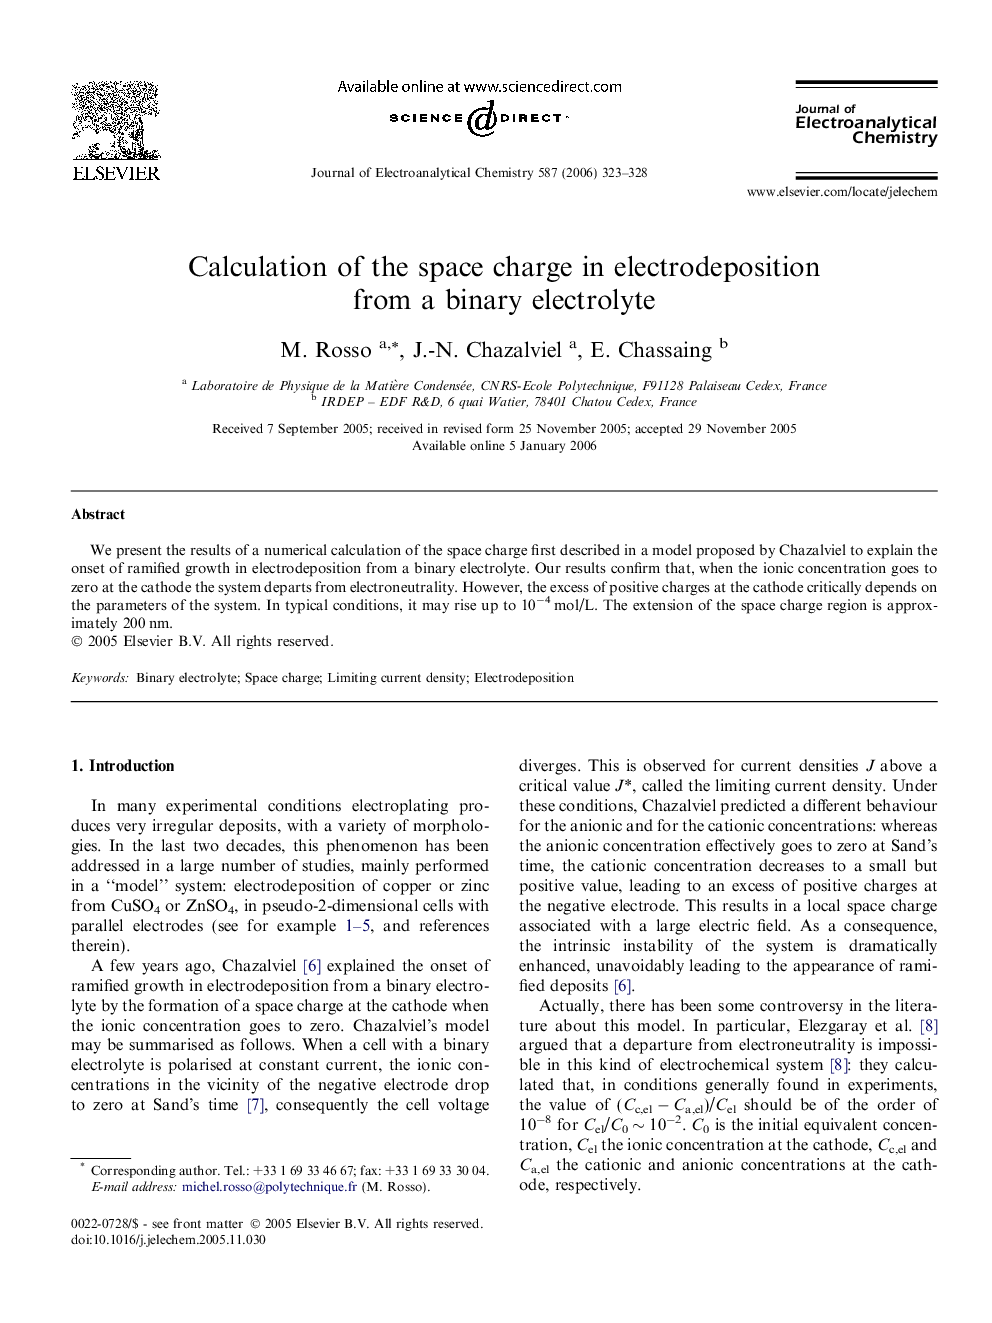 Calculation of the space charge in electrodeposition from a binary electrolyte